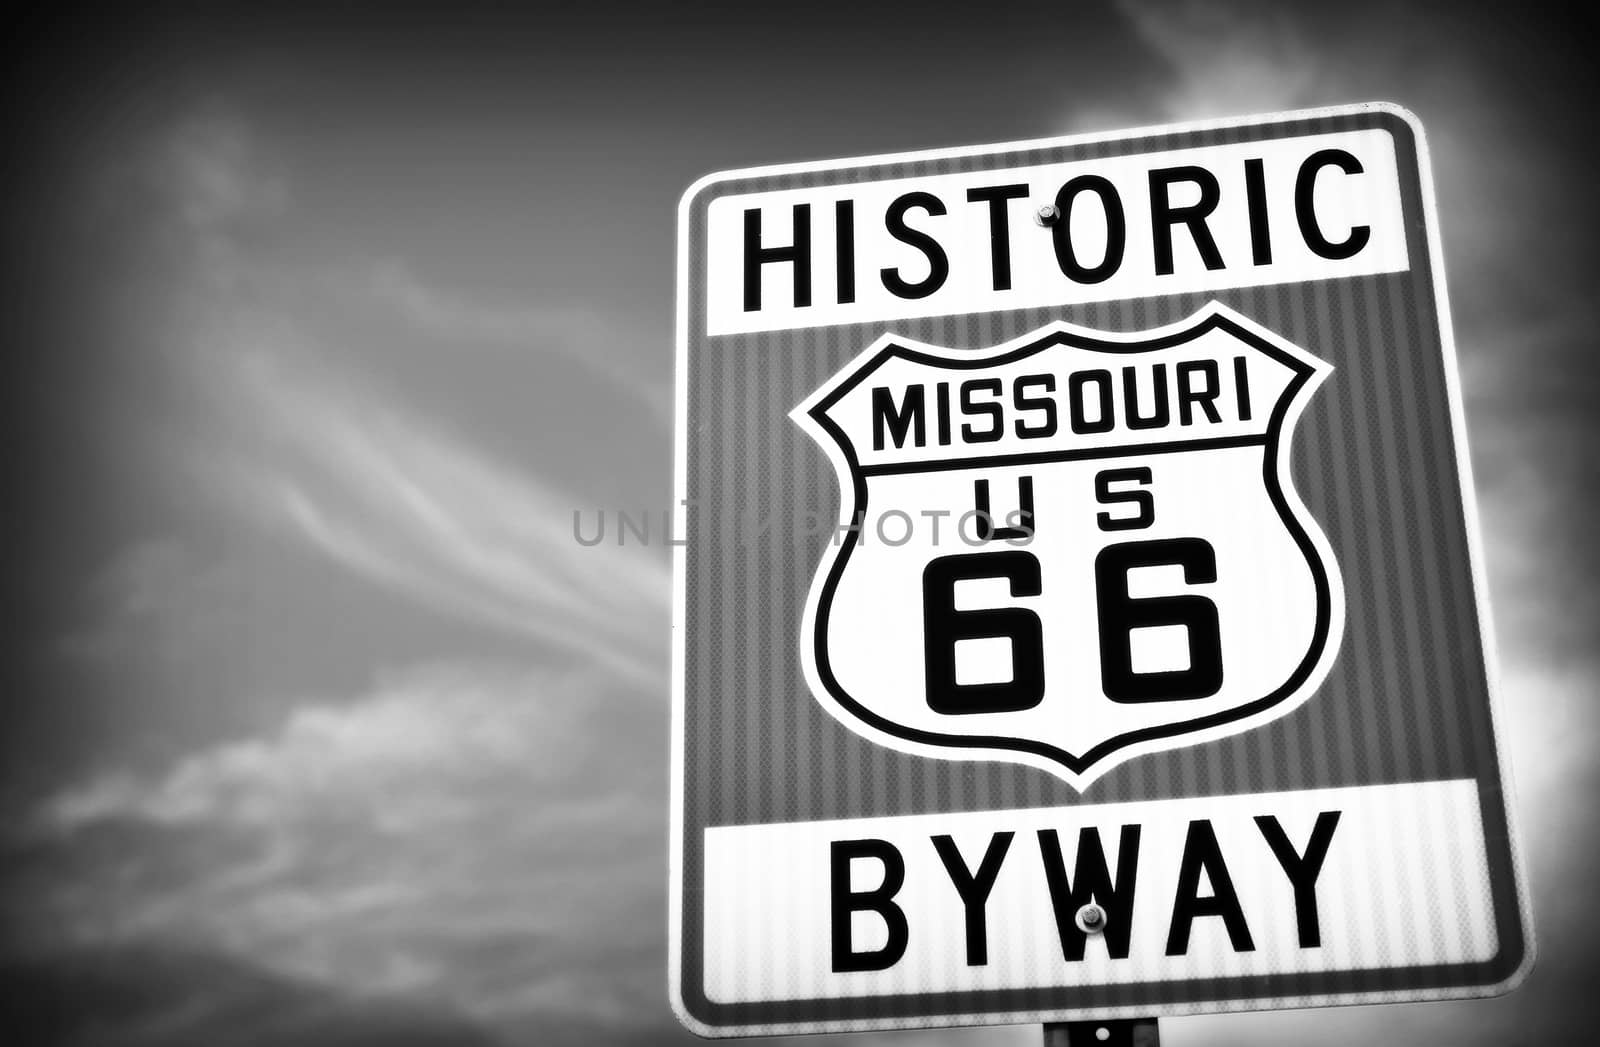 Historic route 66 highway sign in Missouri USA by CreativePhotoSpain